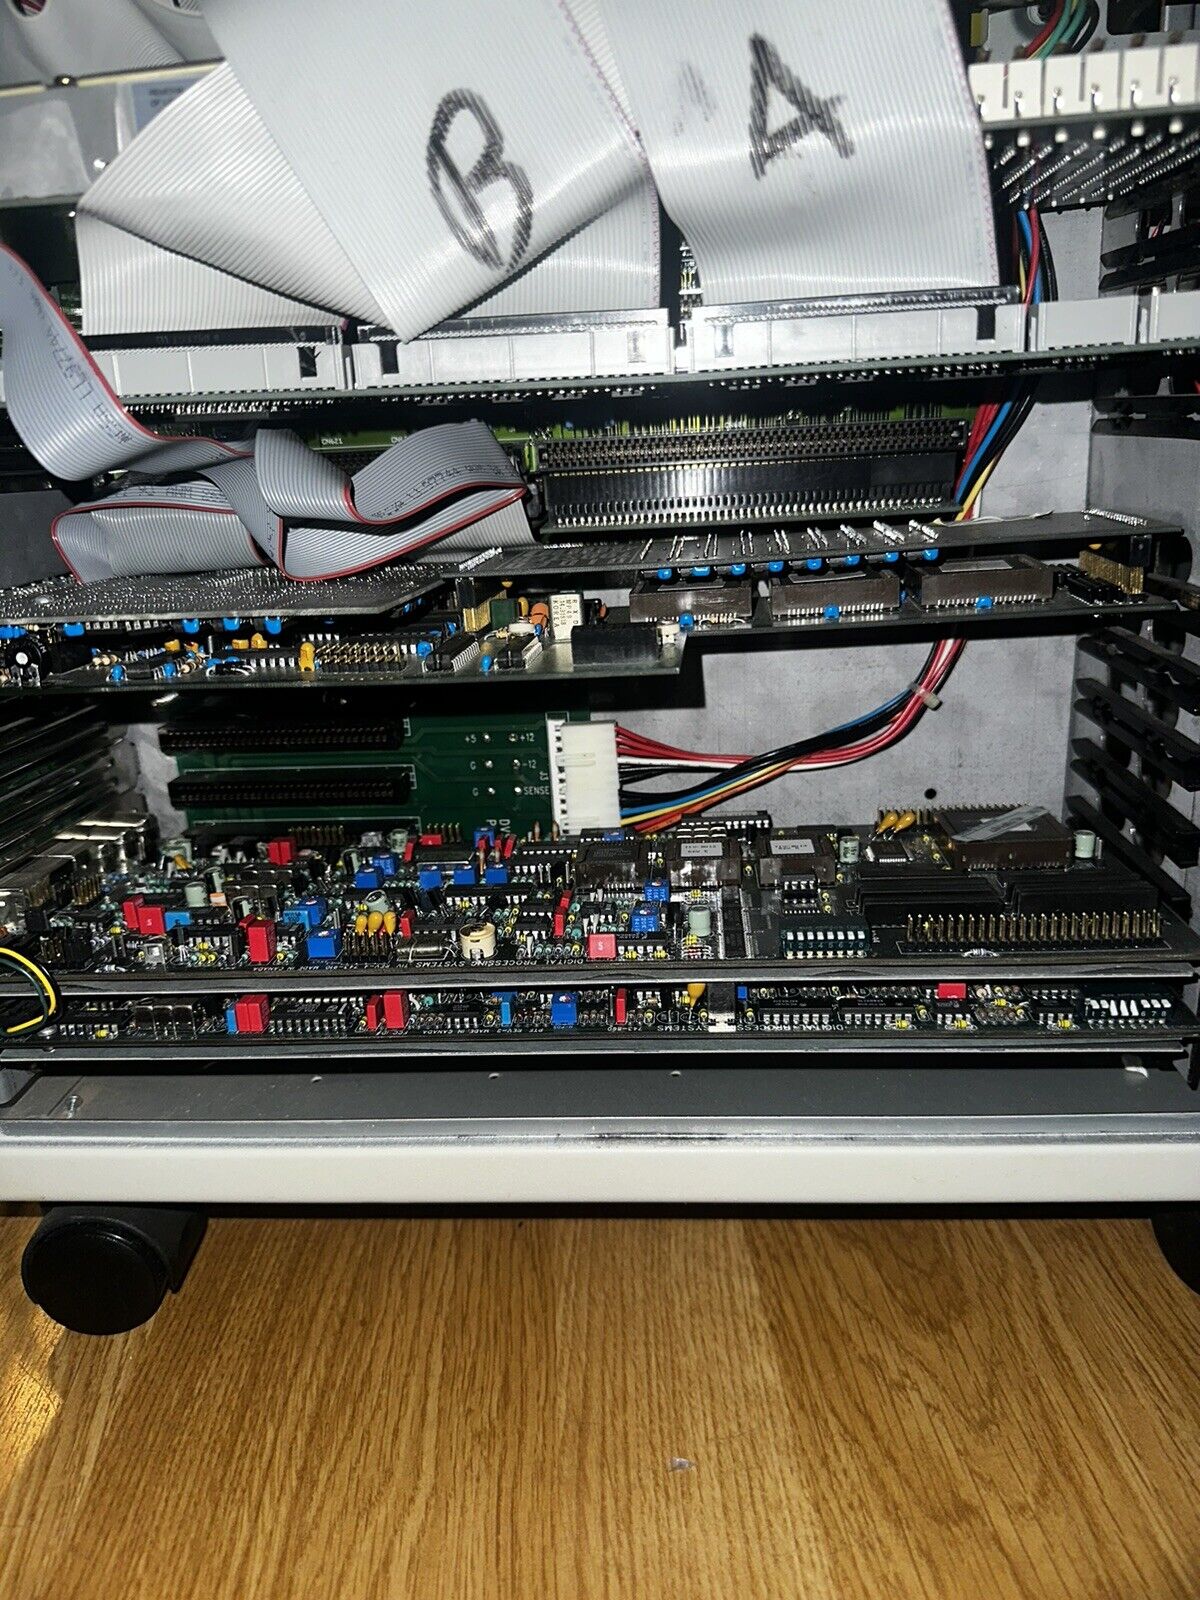 Commodore Amiga A4000 W/ Video Toaster In After Market Tower Because Of Upgrades